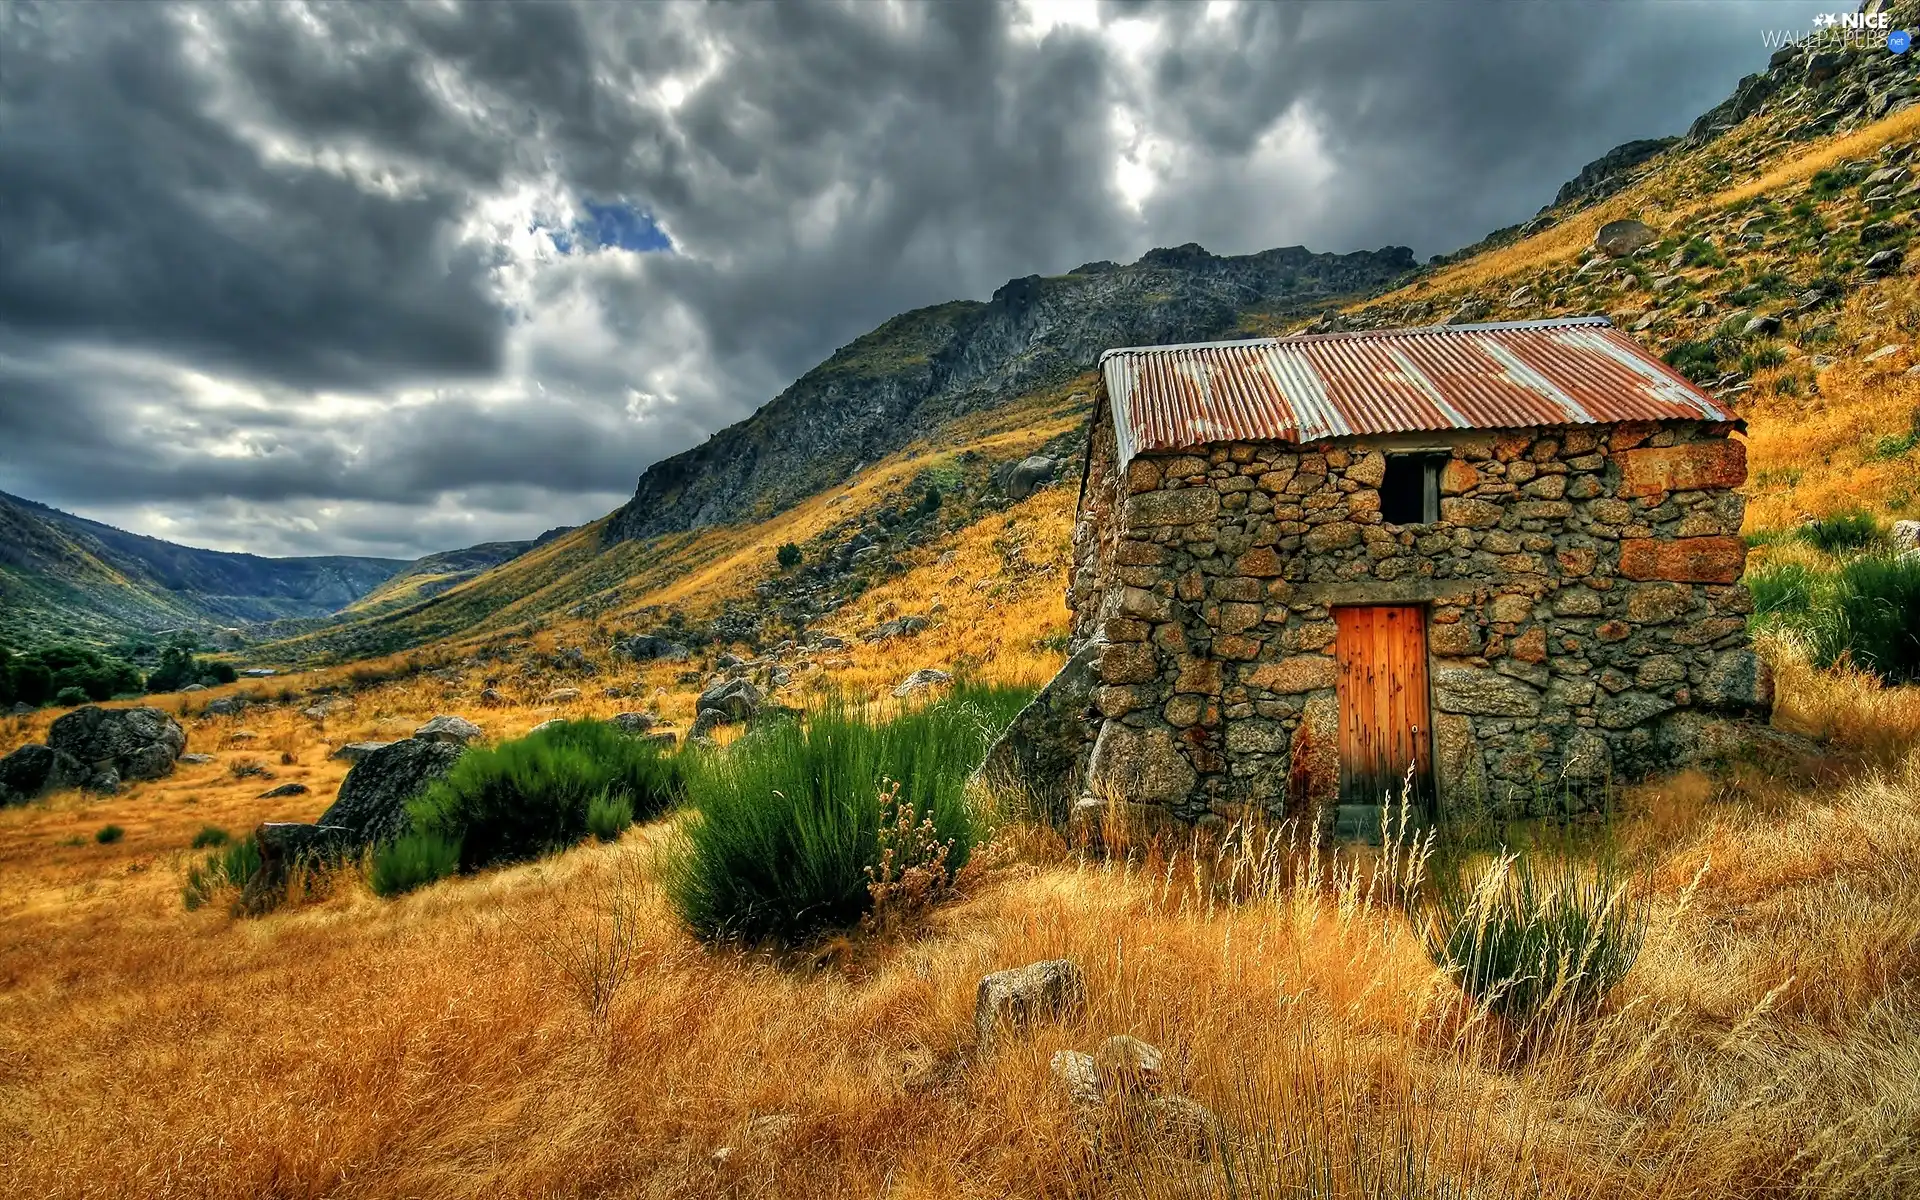 stone, Mountains, dark, clouds, house, Meadow